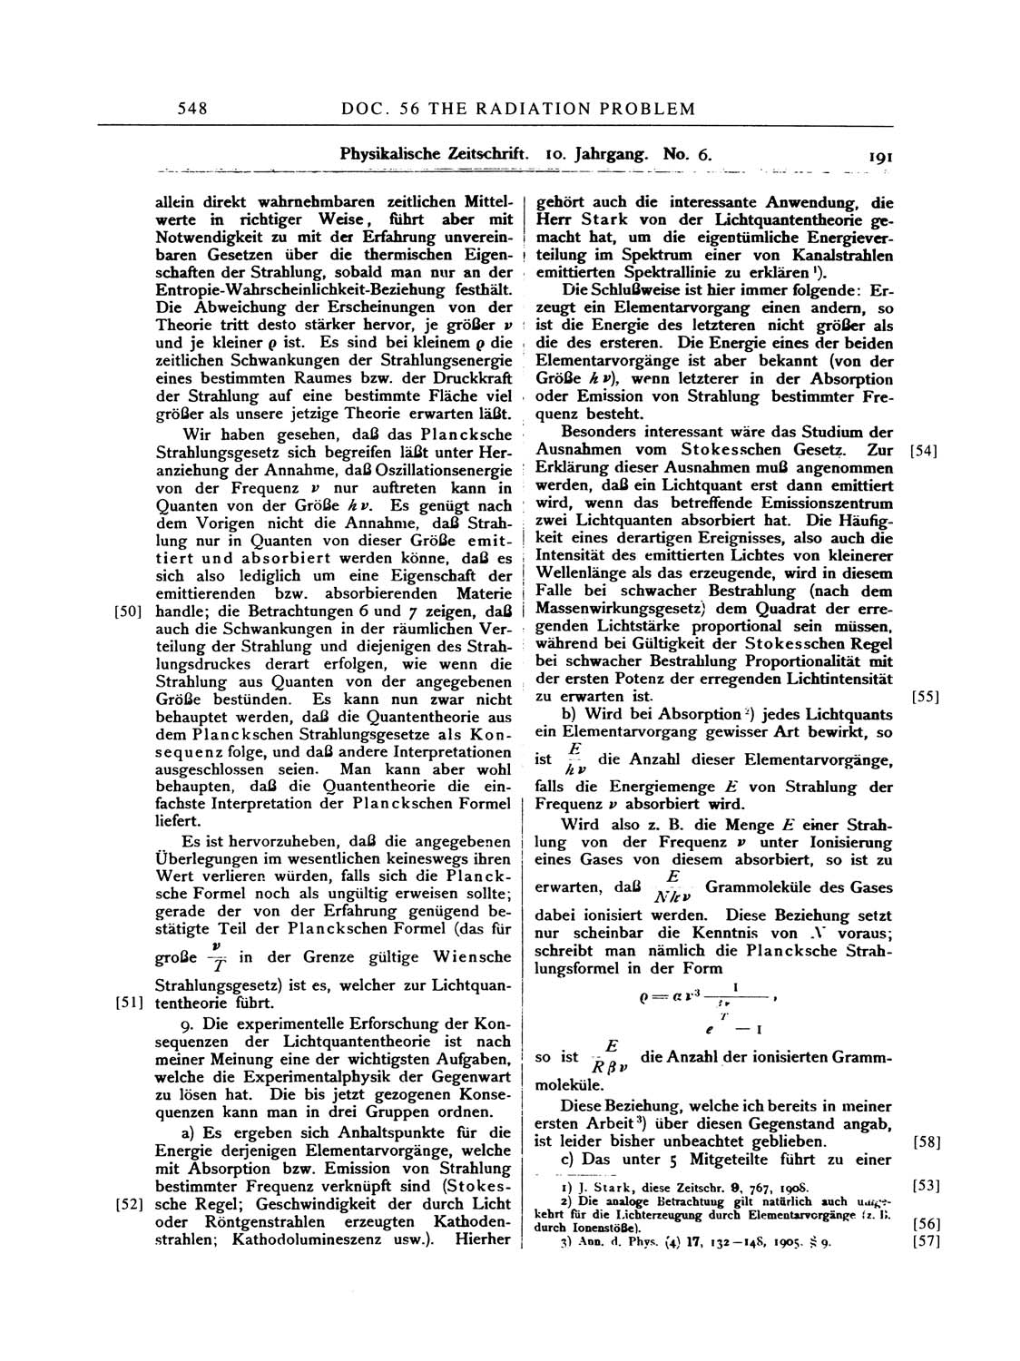 Volume 2: The Swiss Years: Writings, 1900-1909 page 548